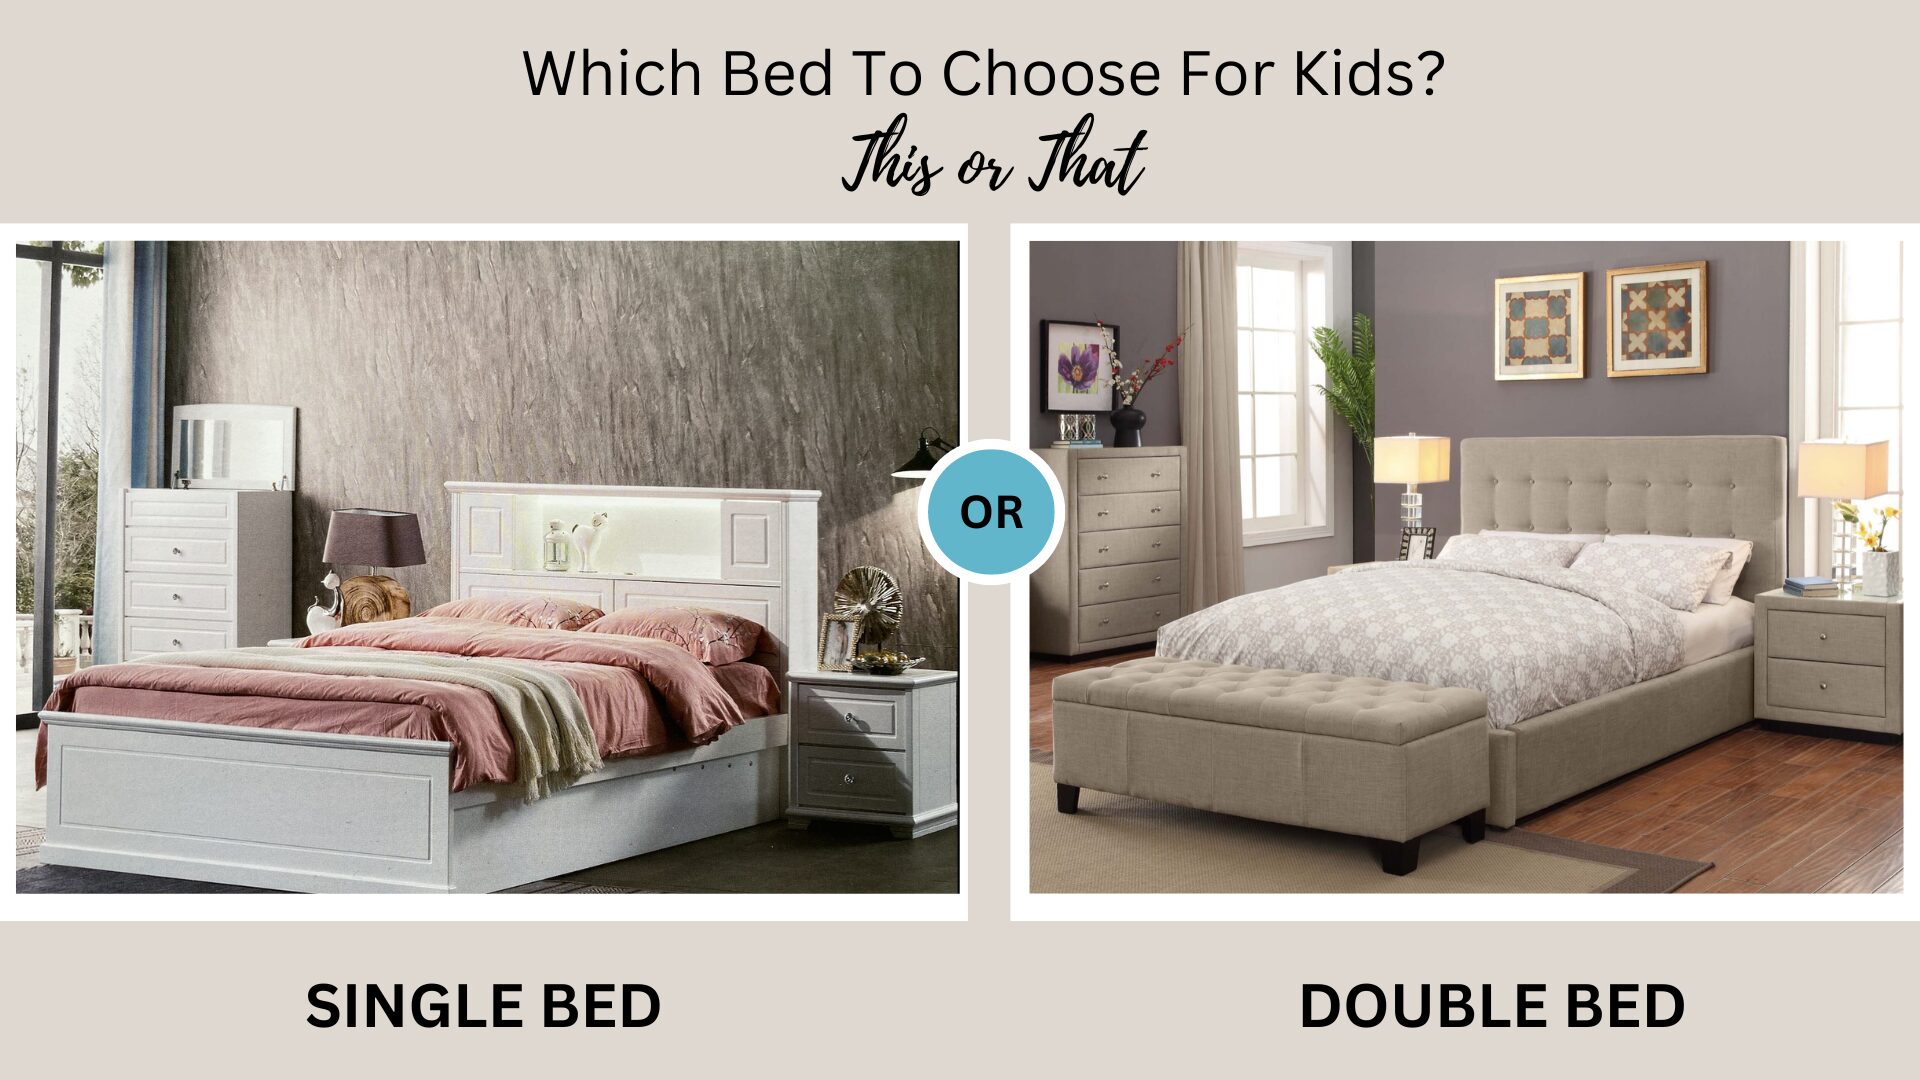 Should I buy Double or Single Bed for Kids